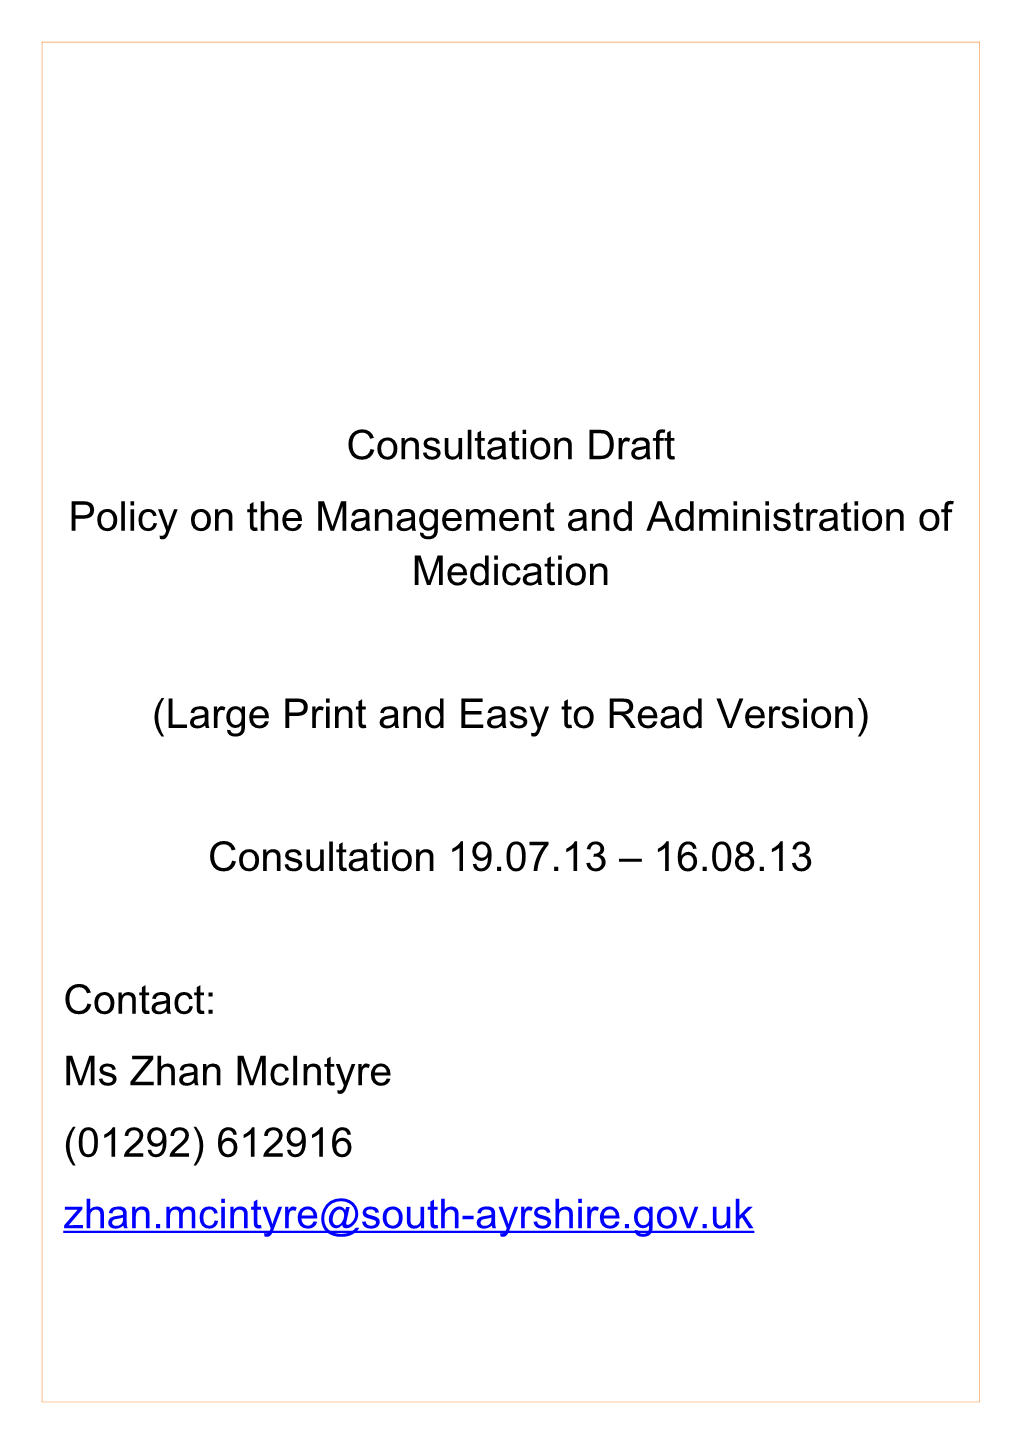 Policy on the Management and Administration of Medication